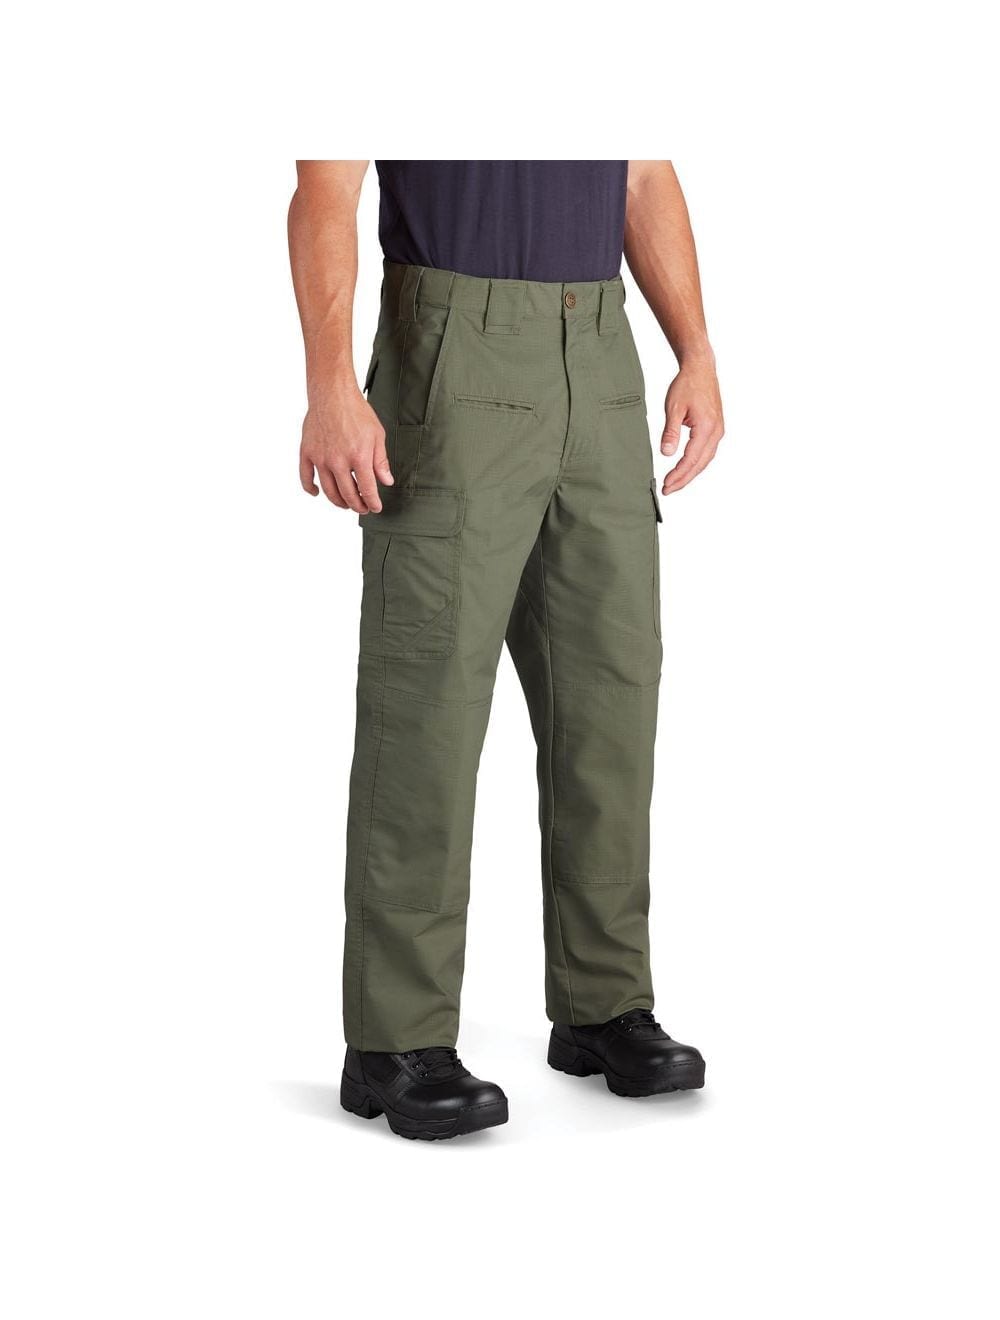 Propper Kinetic Mens Tactical Pant, Olive Drab - COPS Products